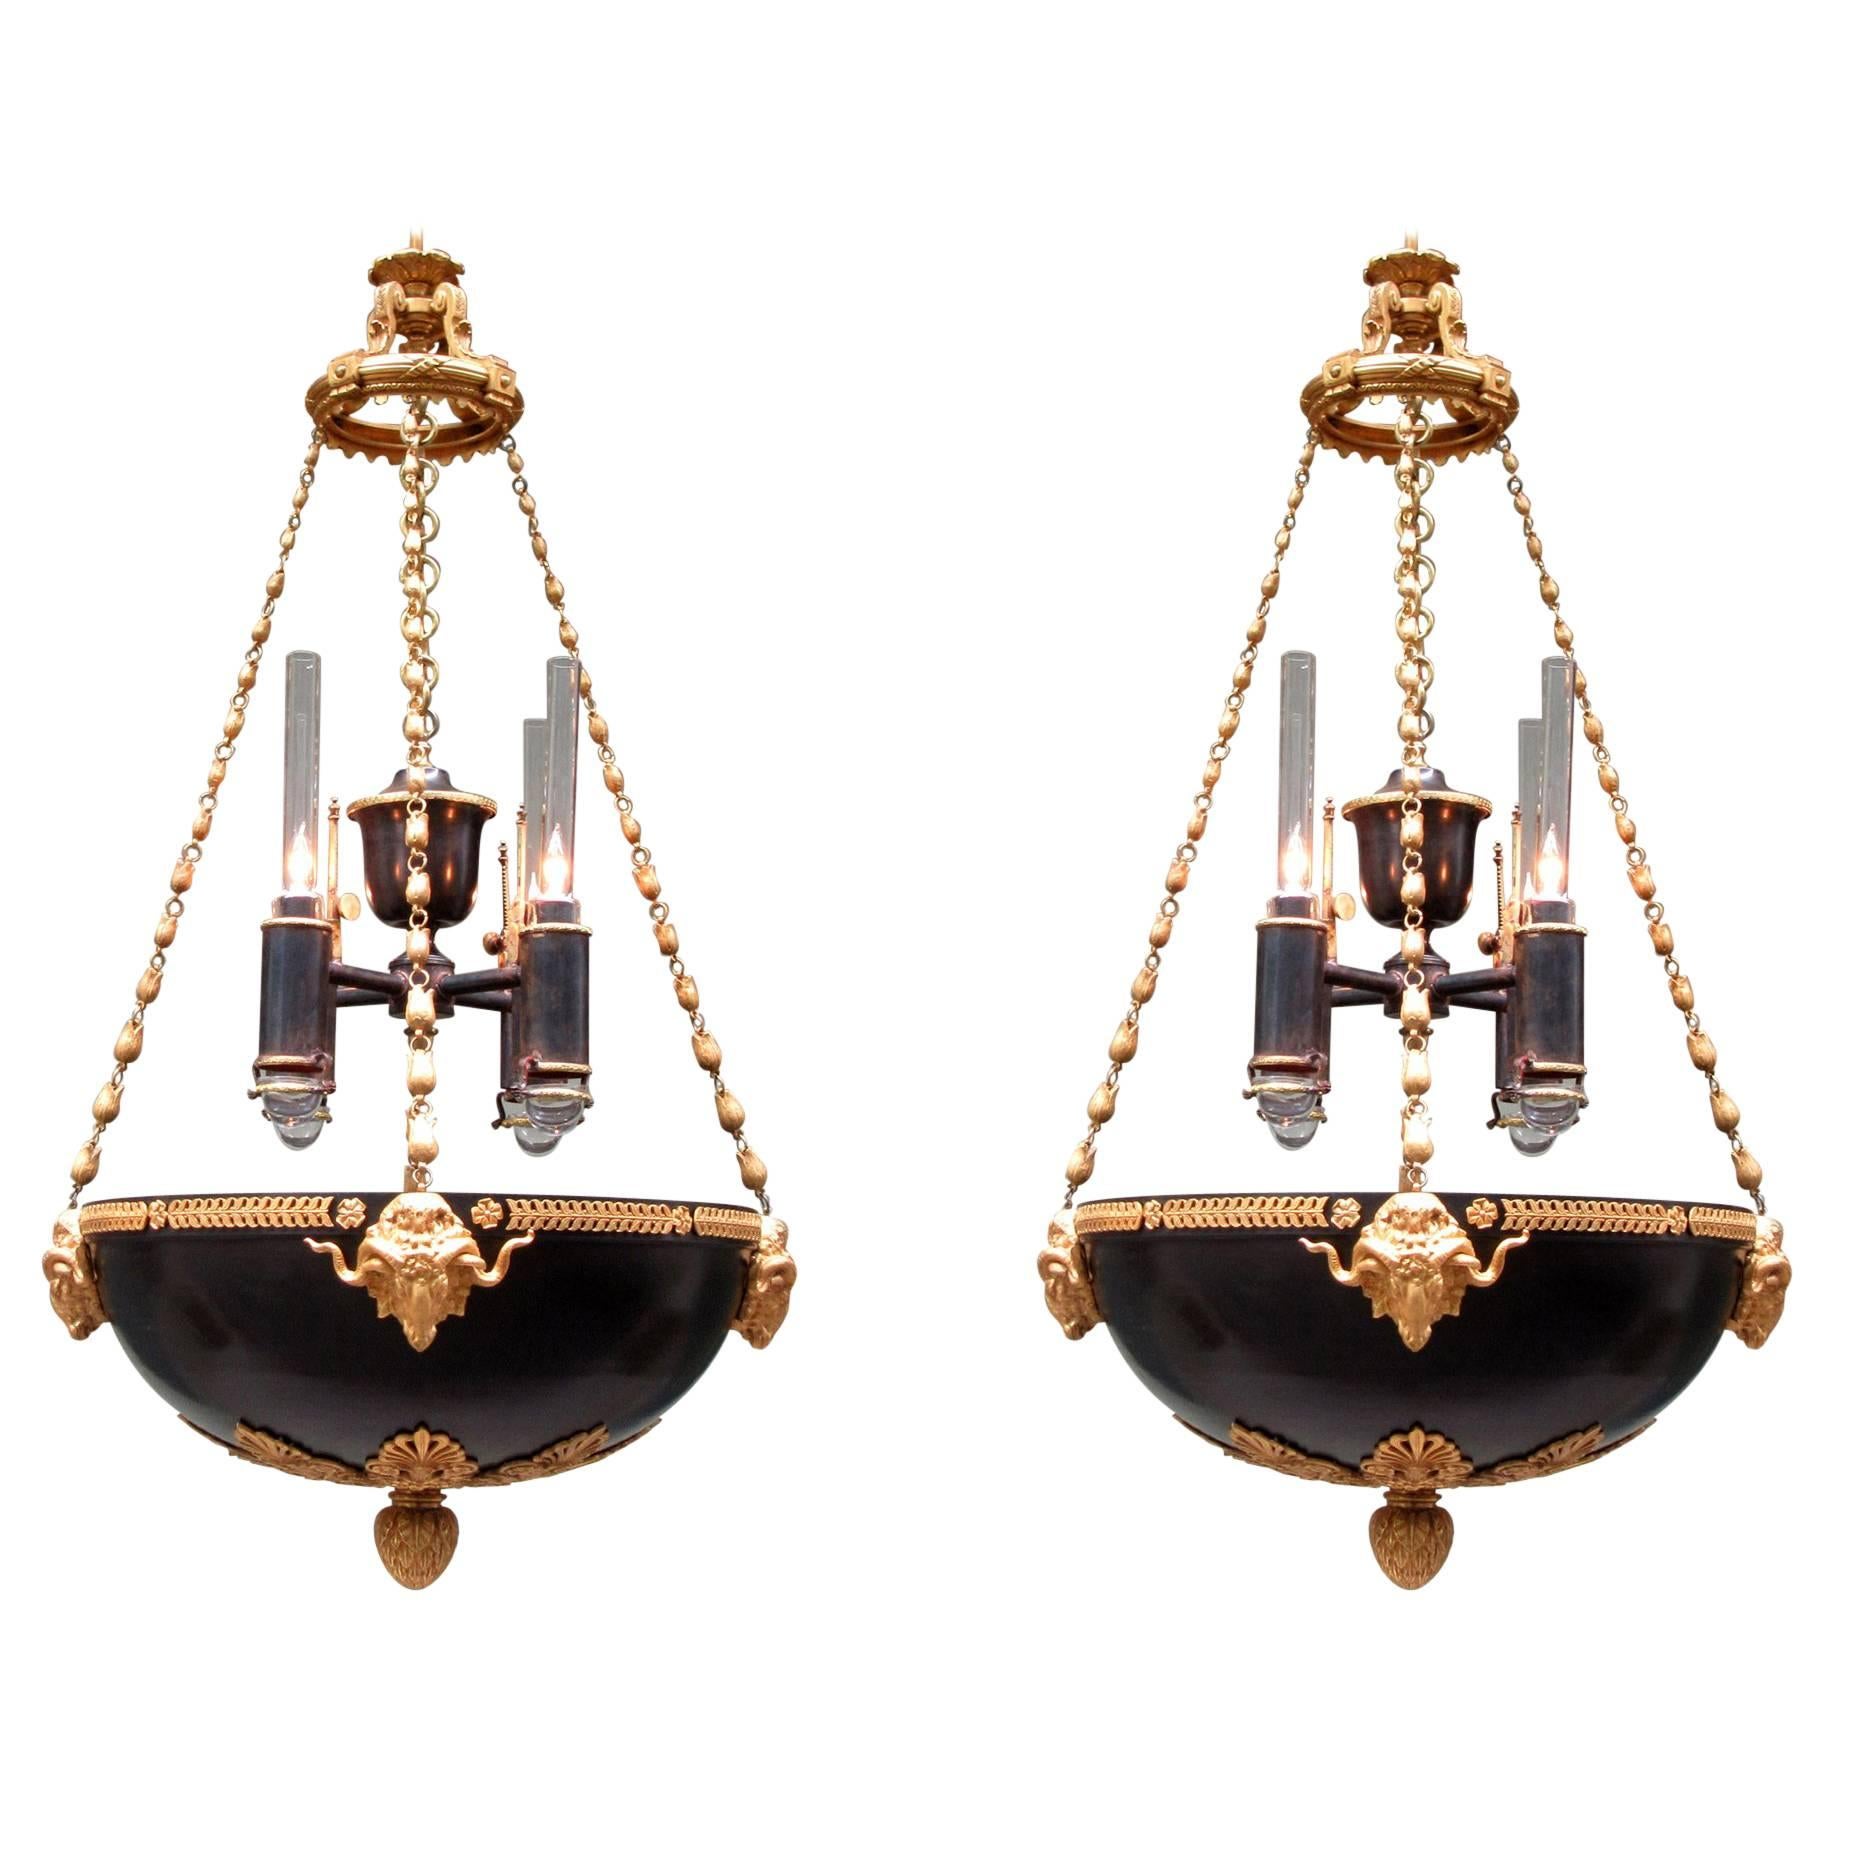 Pair of Early 19th Century English Regency Bronze Argand Pendant Chandeliers